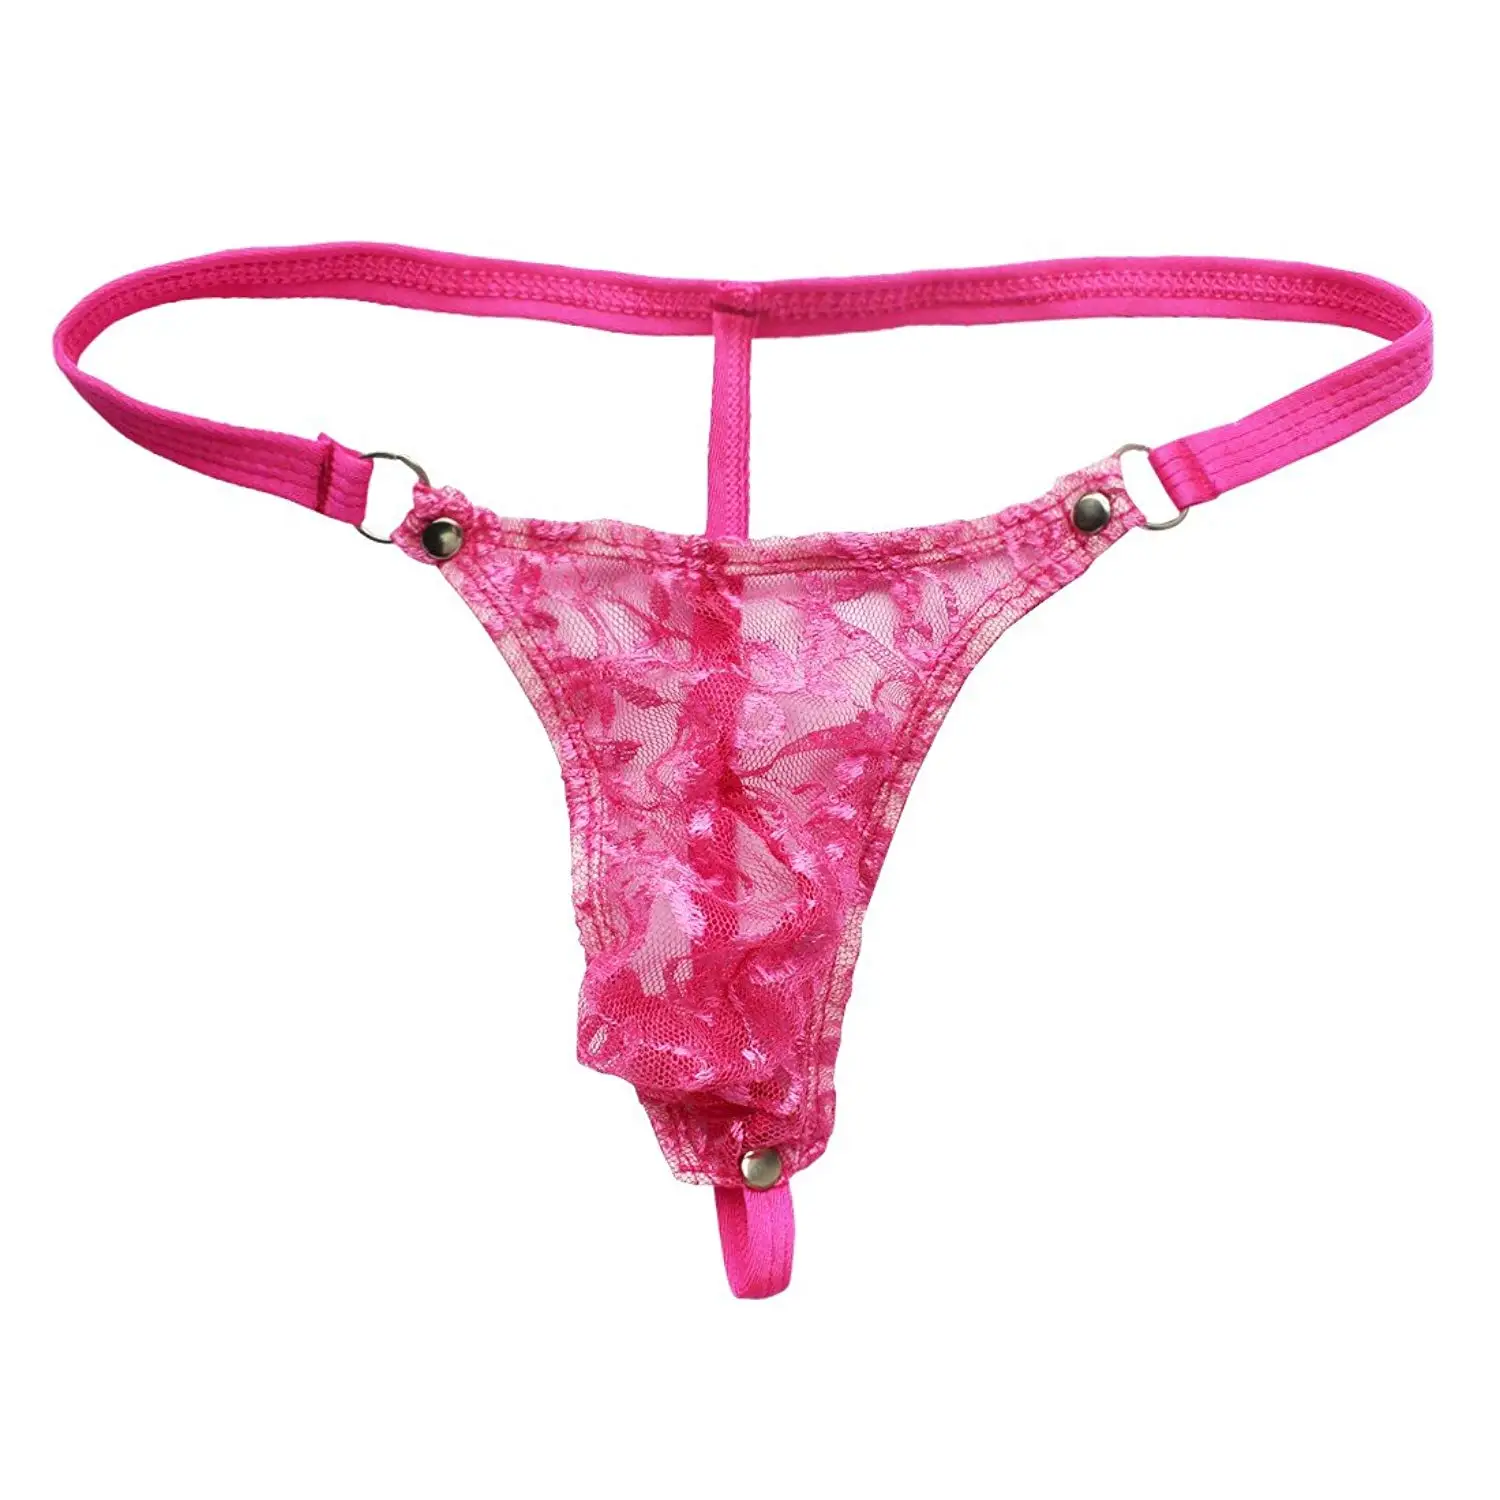 Cheap Sissy Thong, find Sissy Thong deals on line at Alibaba.com